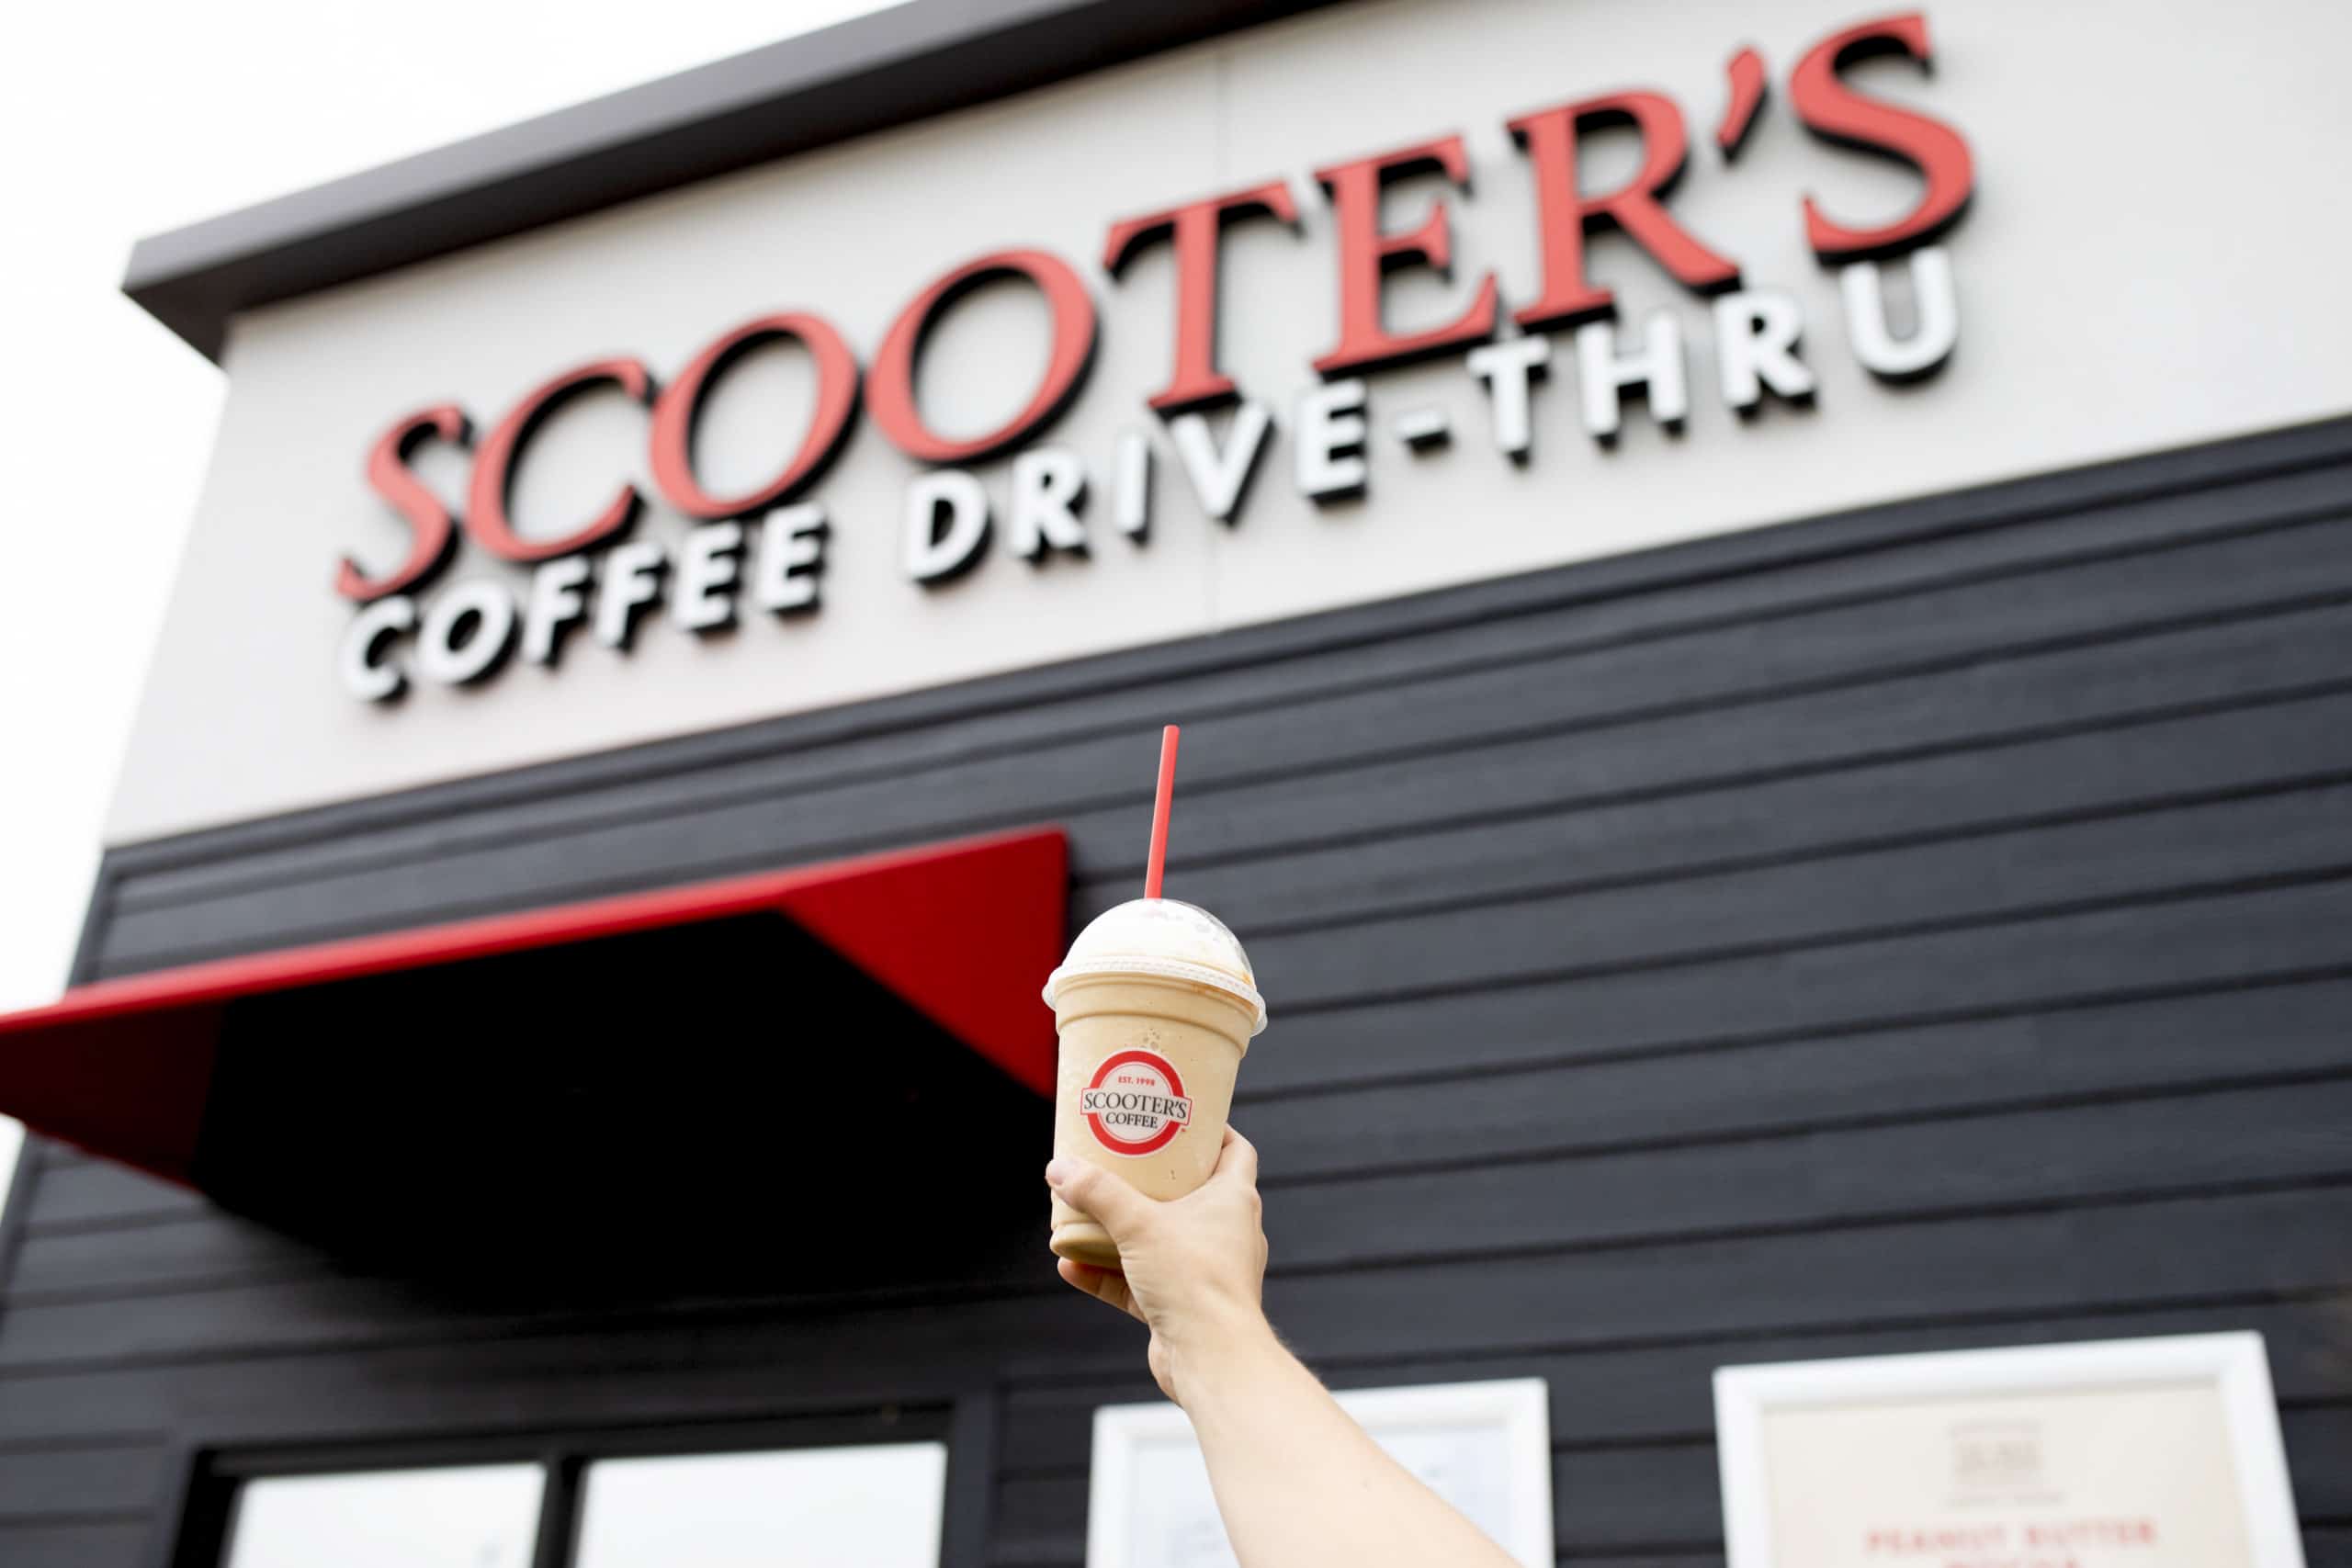 A person triumphantly holding a blended coffee drink in front of a Scooter's Coffee location.